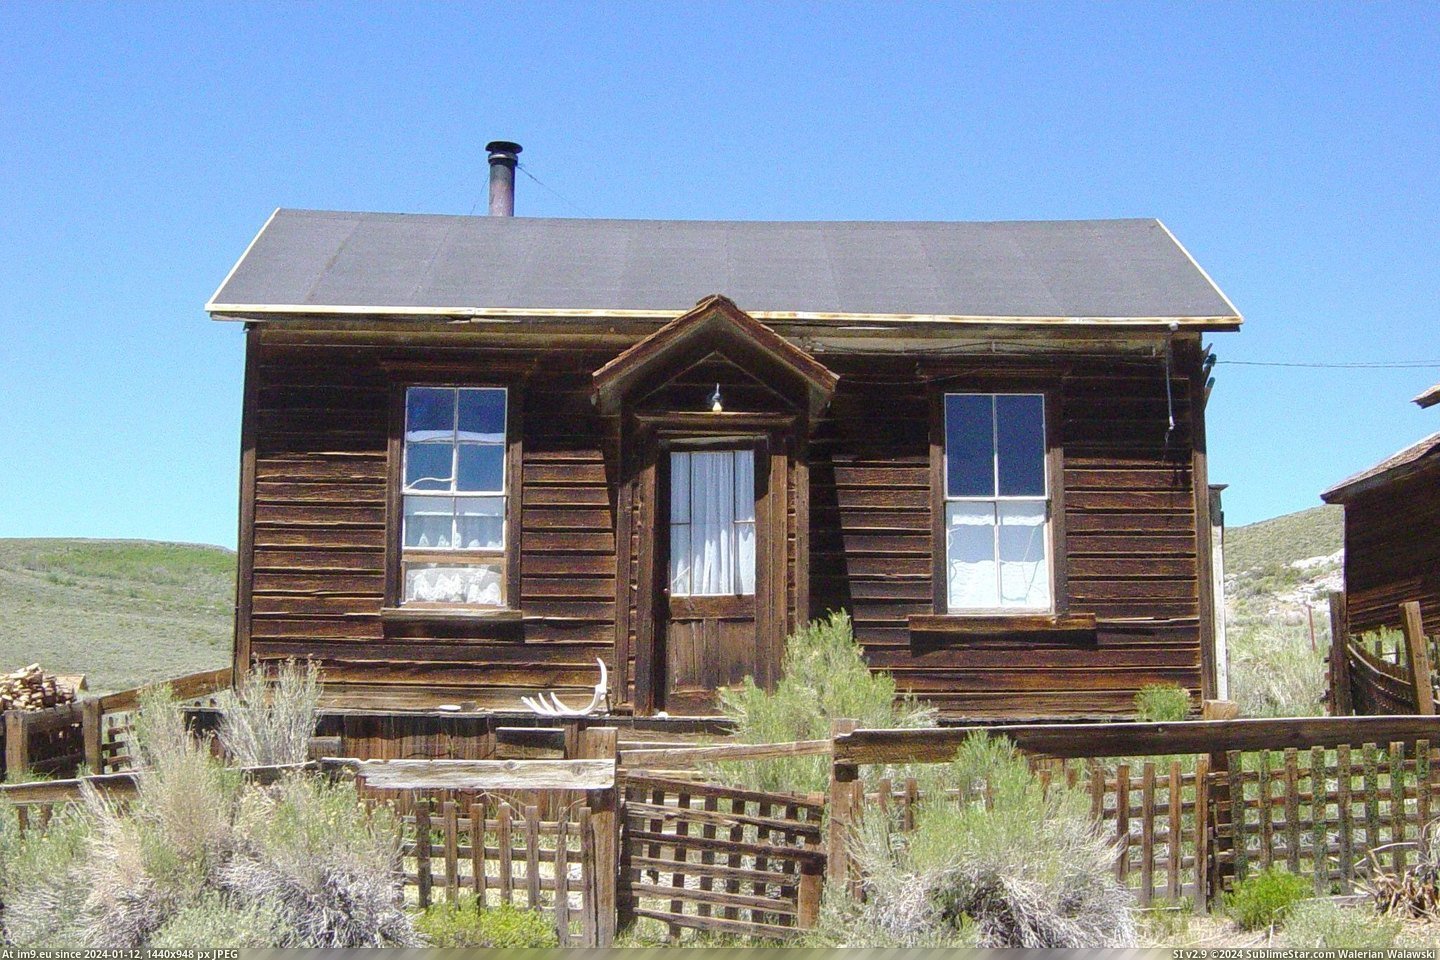 Donnelly House In Bodie, California (in Bodie - a ghost town in Eastern California)